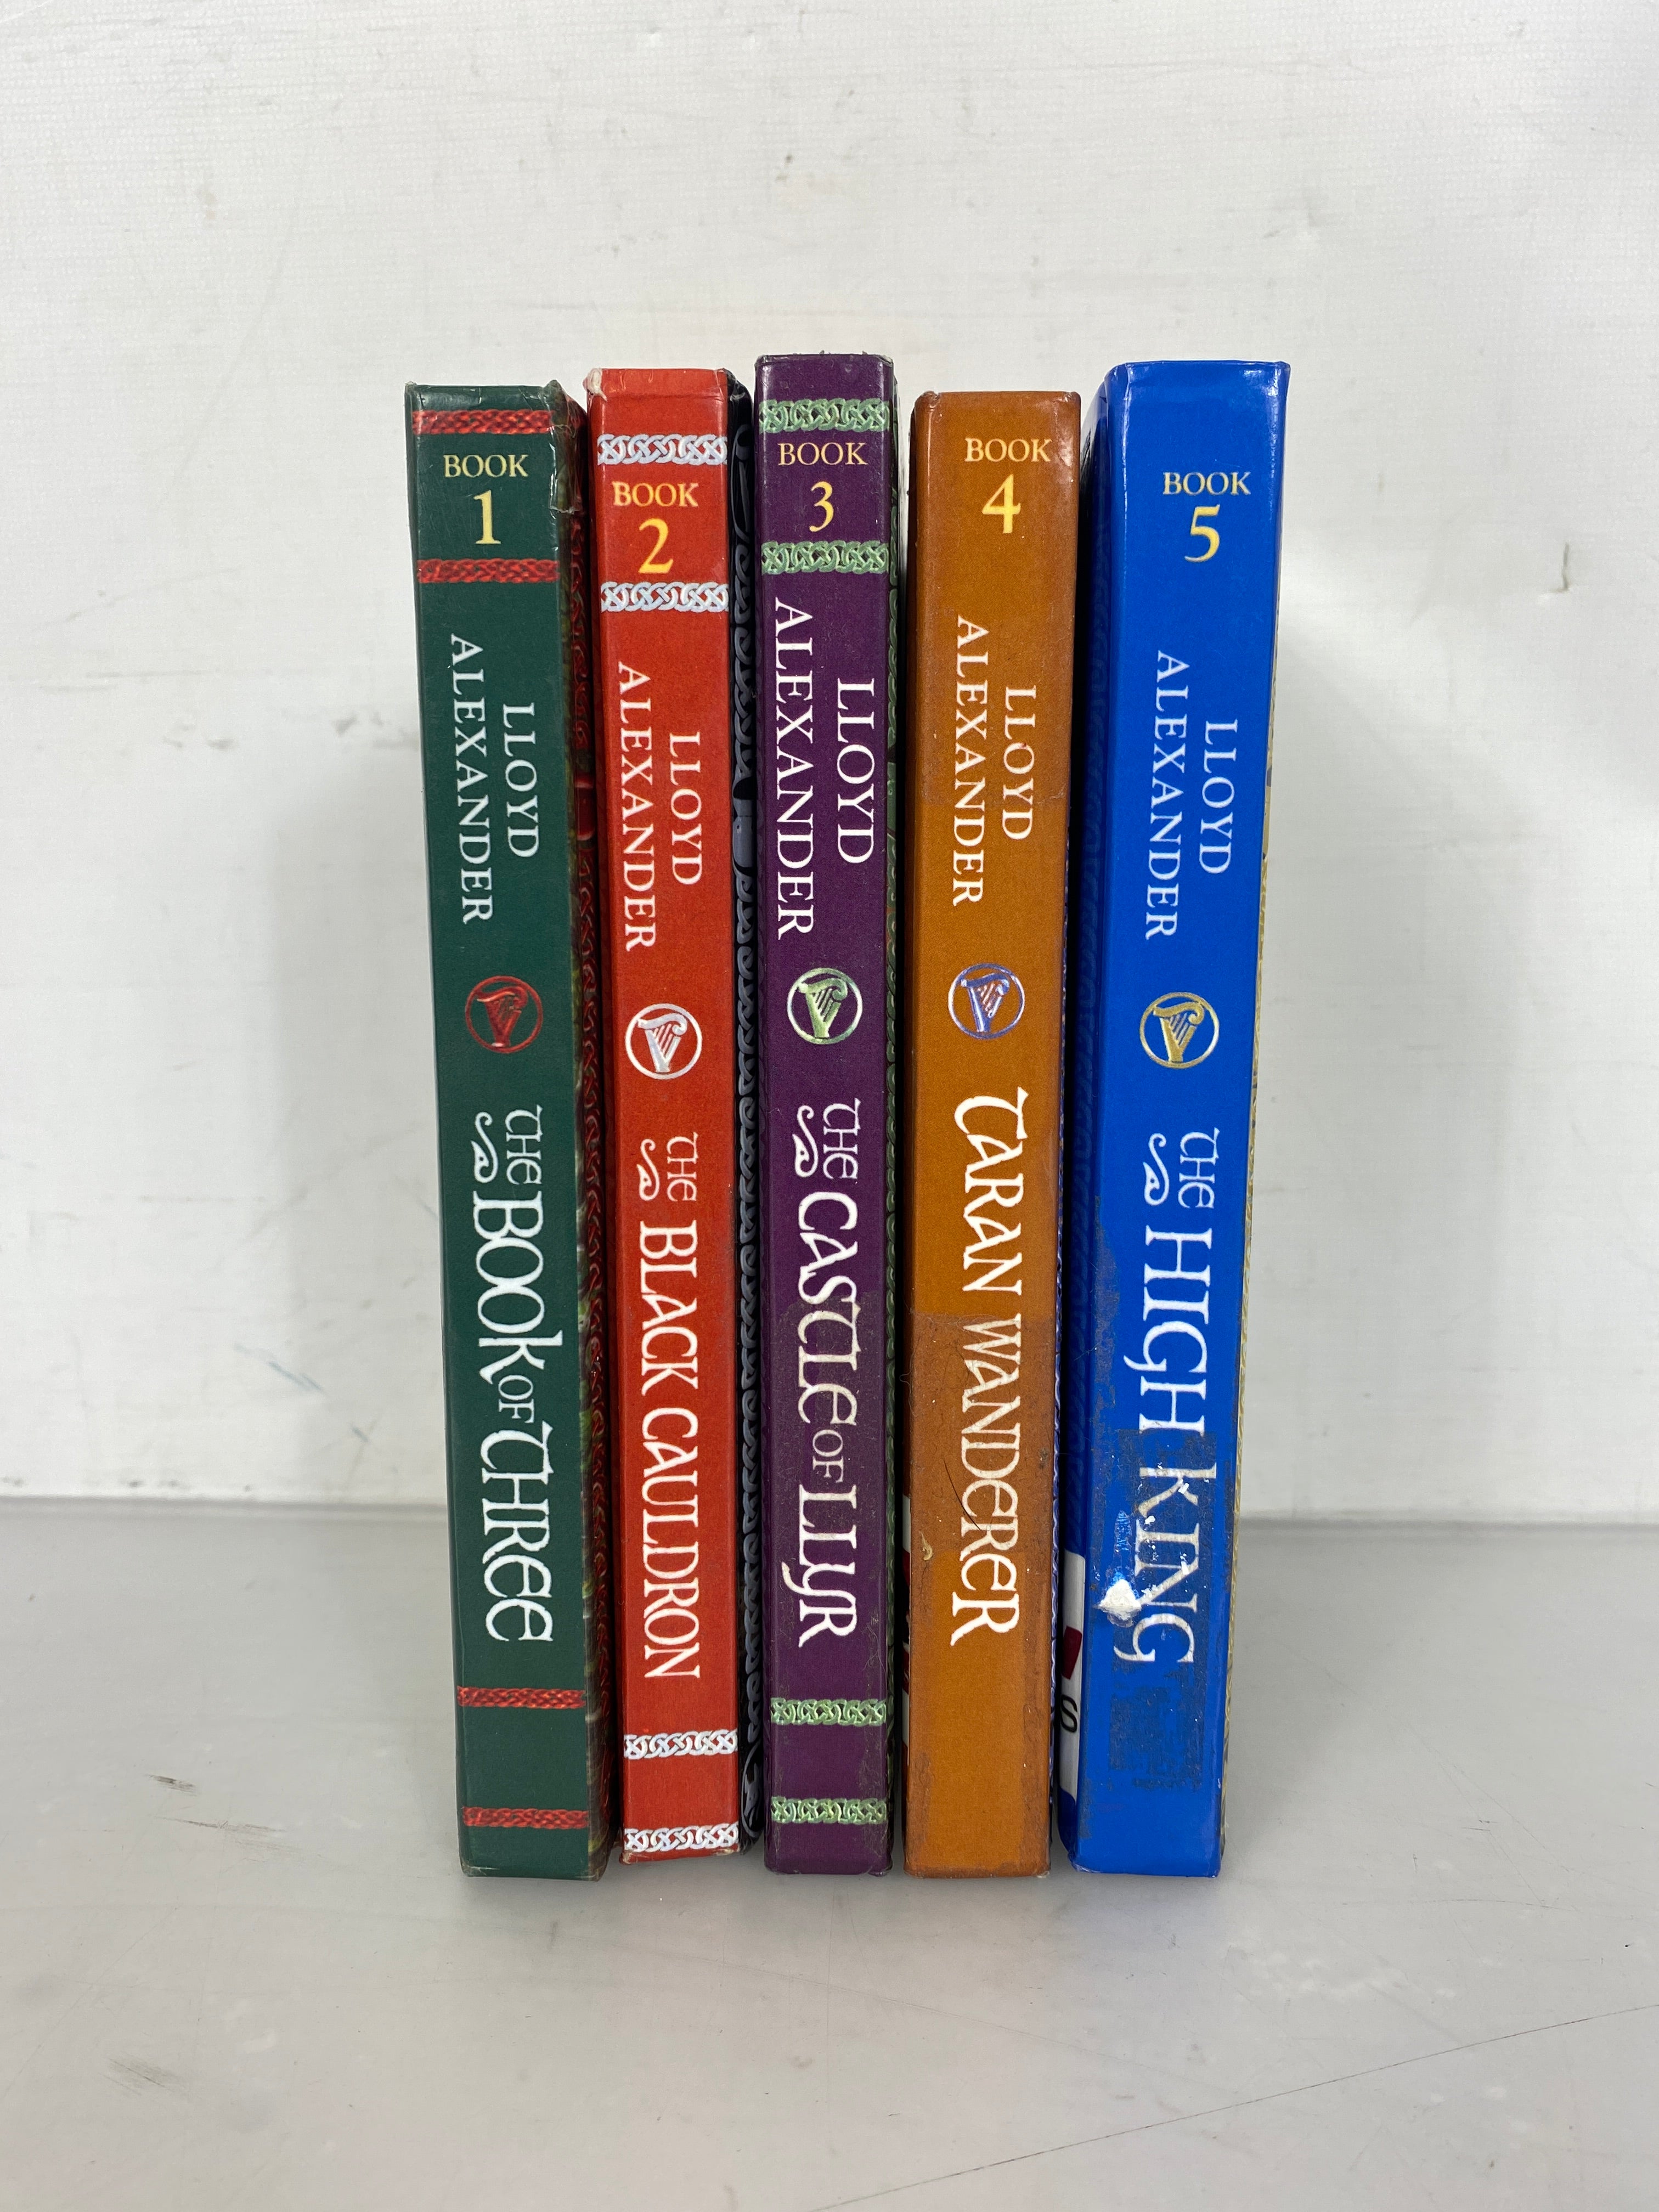 5 Book Set: The Chronicles of Prydain by Lloyd Alexander Books 1-5 HC (2009-2011) Former Library Copies